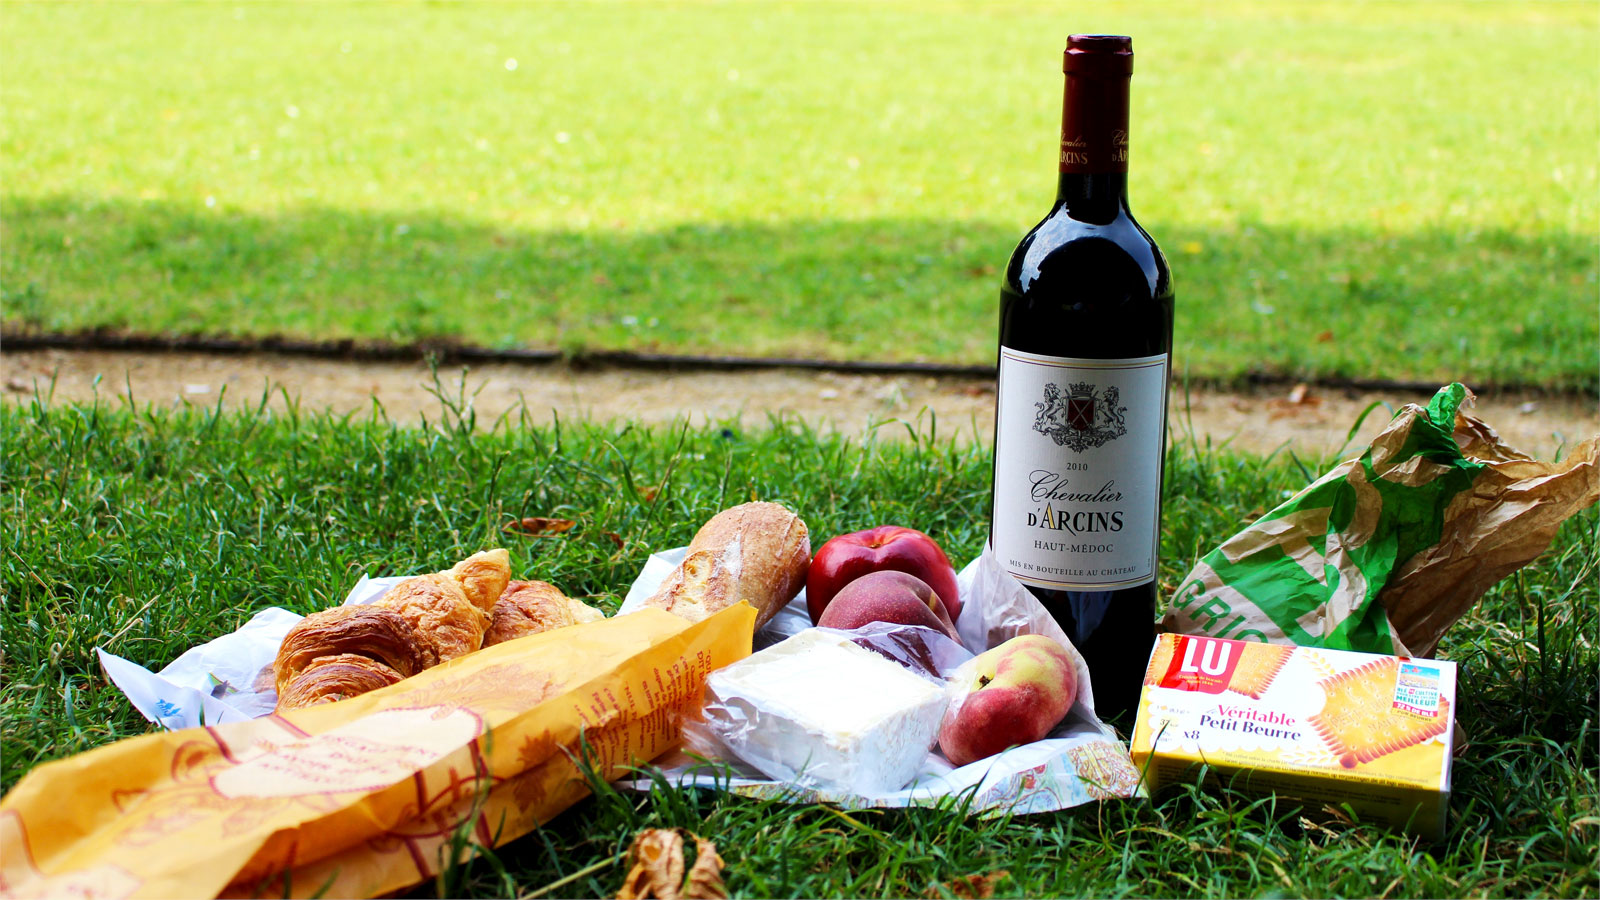 How To Pack A Perfect Spring Picnic [Infographic]